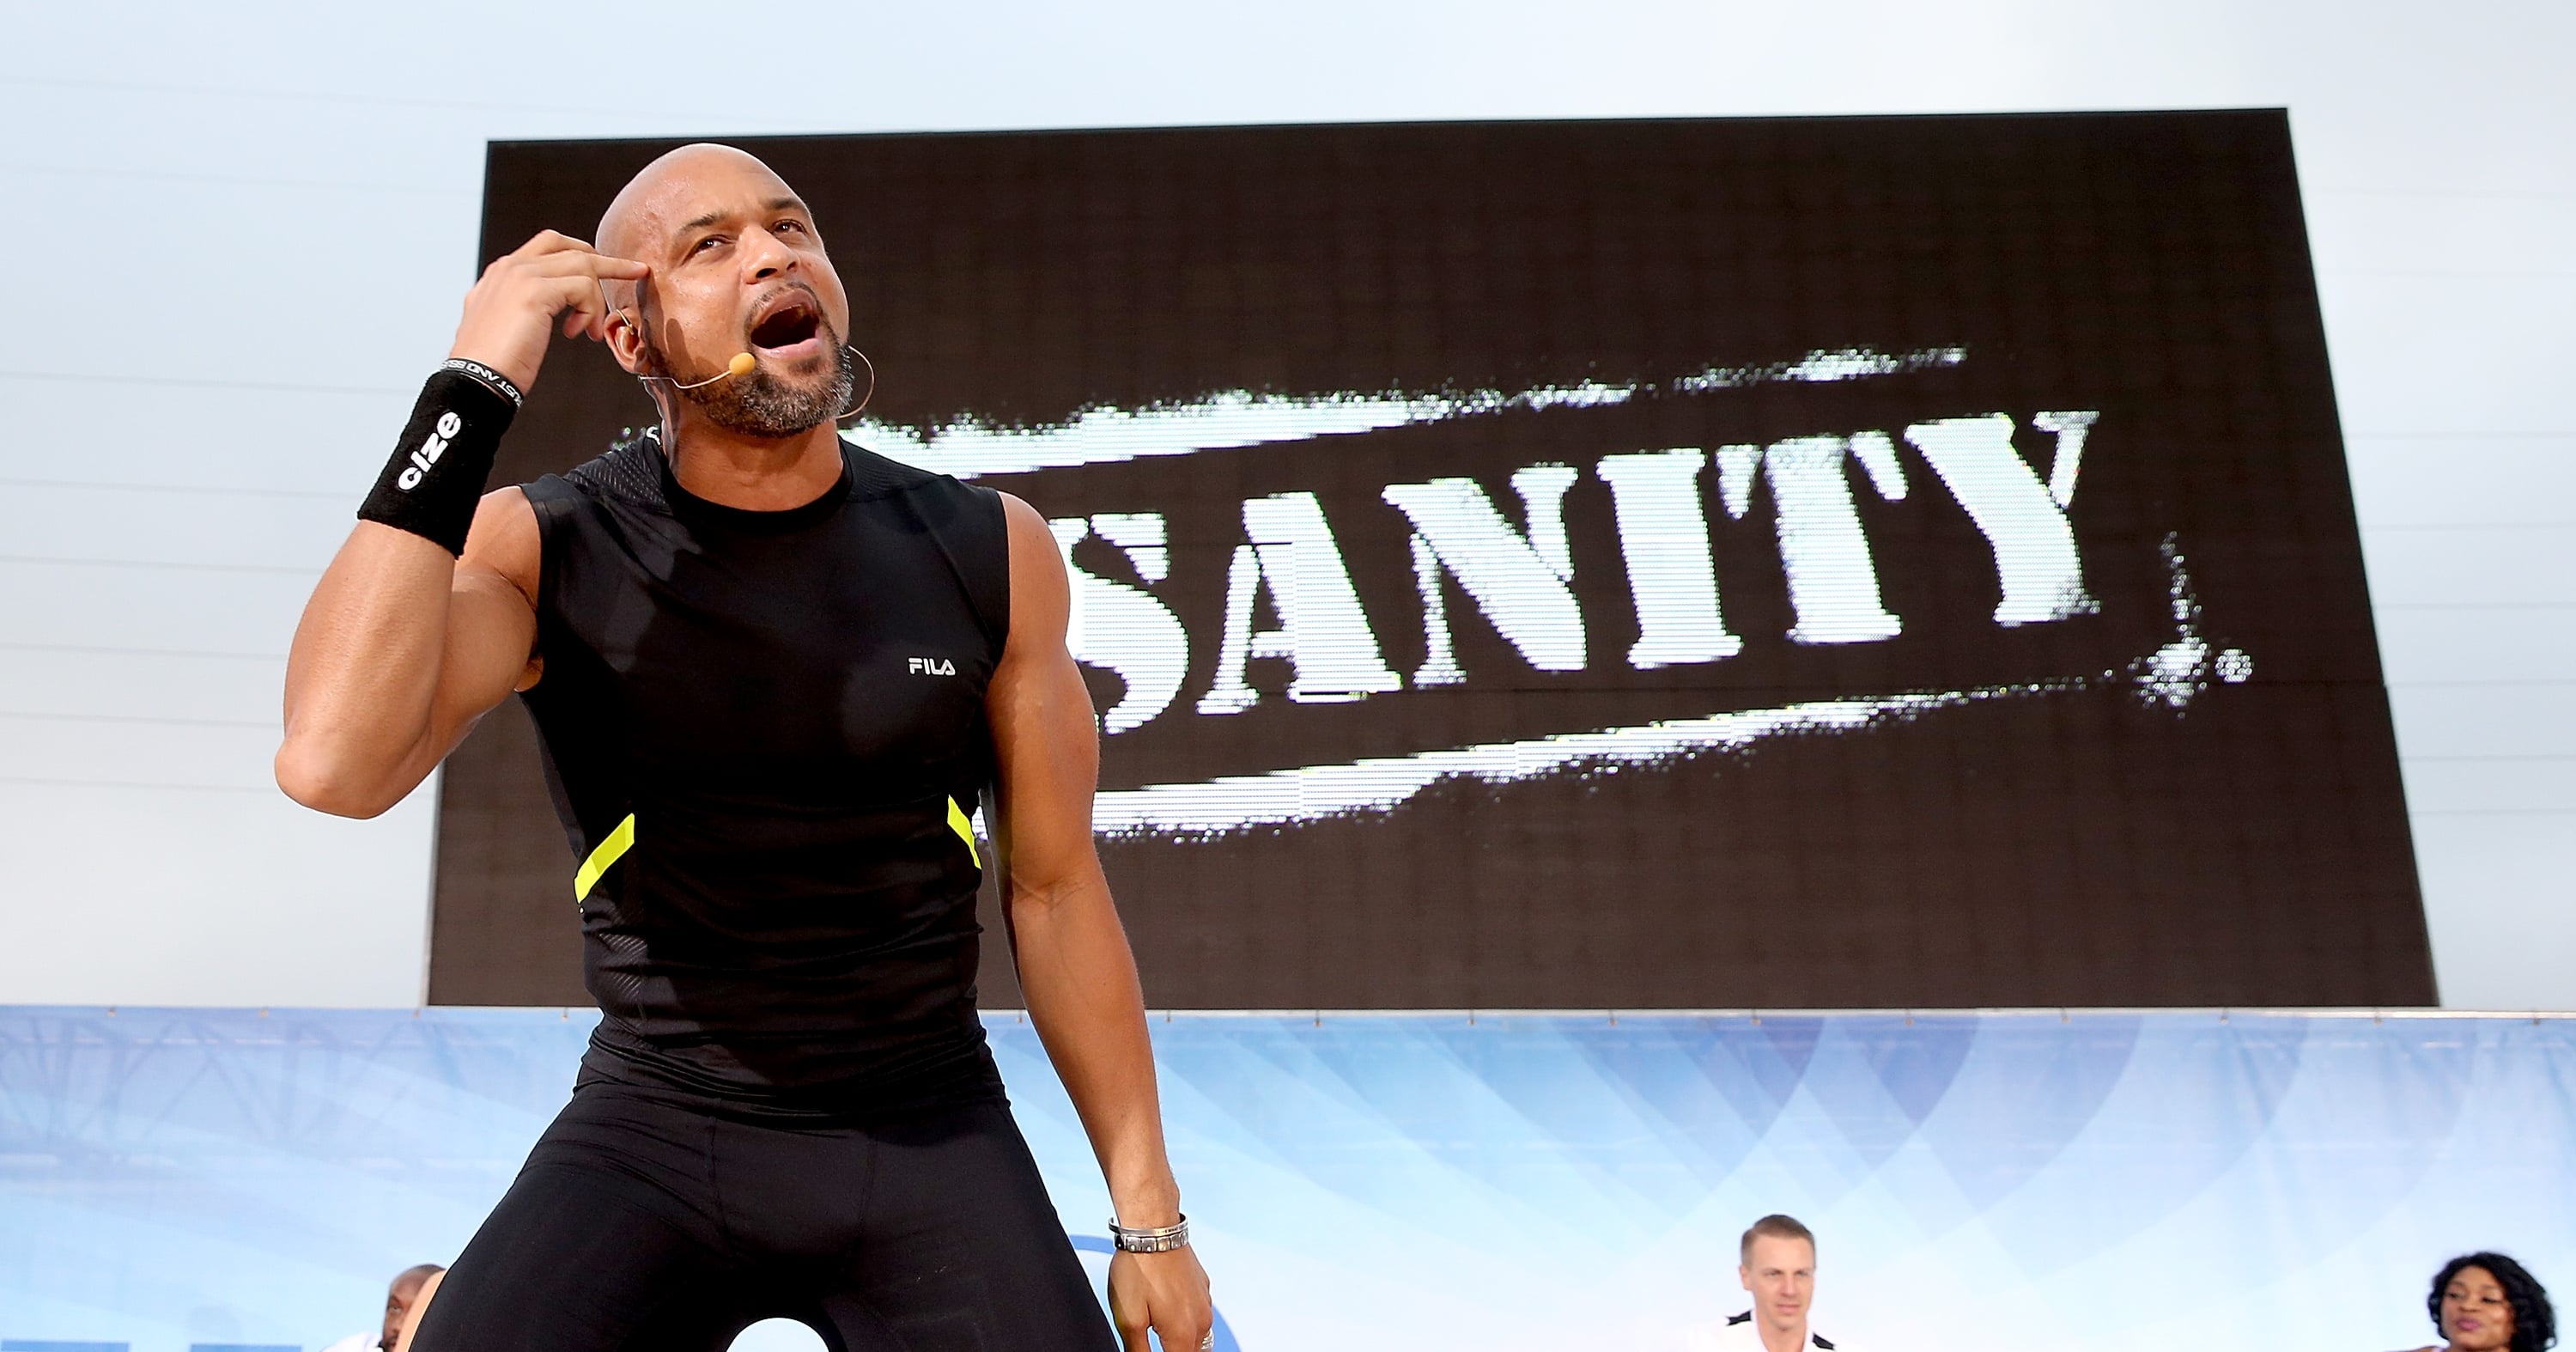 I Tried the Insanity Workout, and Here’s How it Went